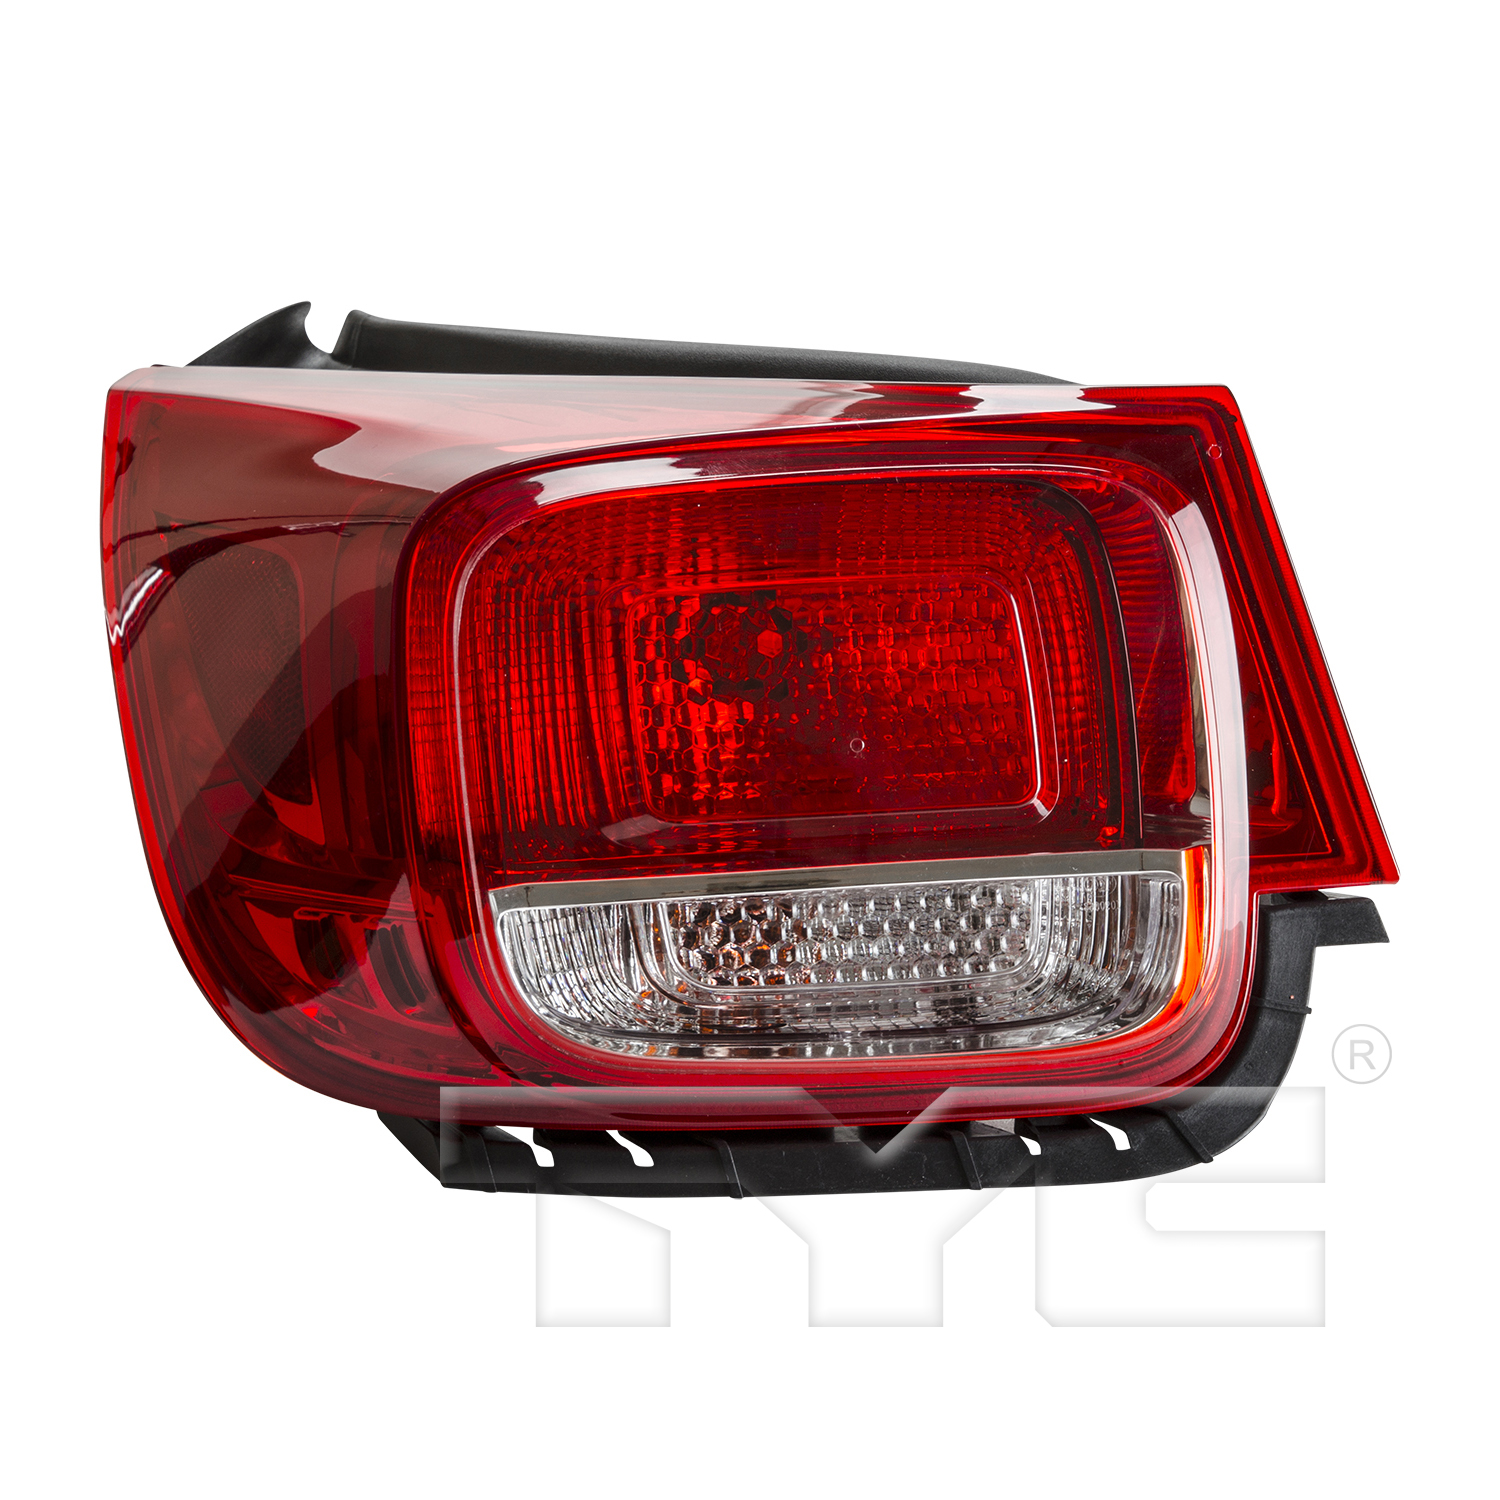 Aftermarket TAILLIGHTS for CHEVROLET - MALIBU, MALIBU,13-14,LT Taillamp assy outer